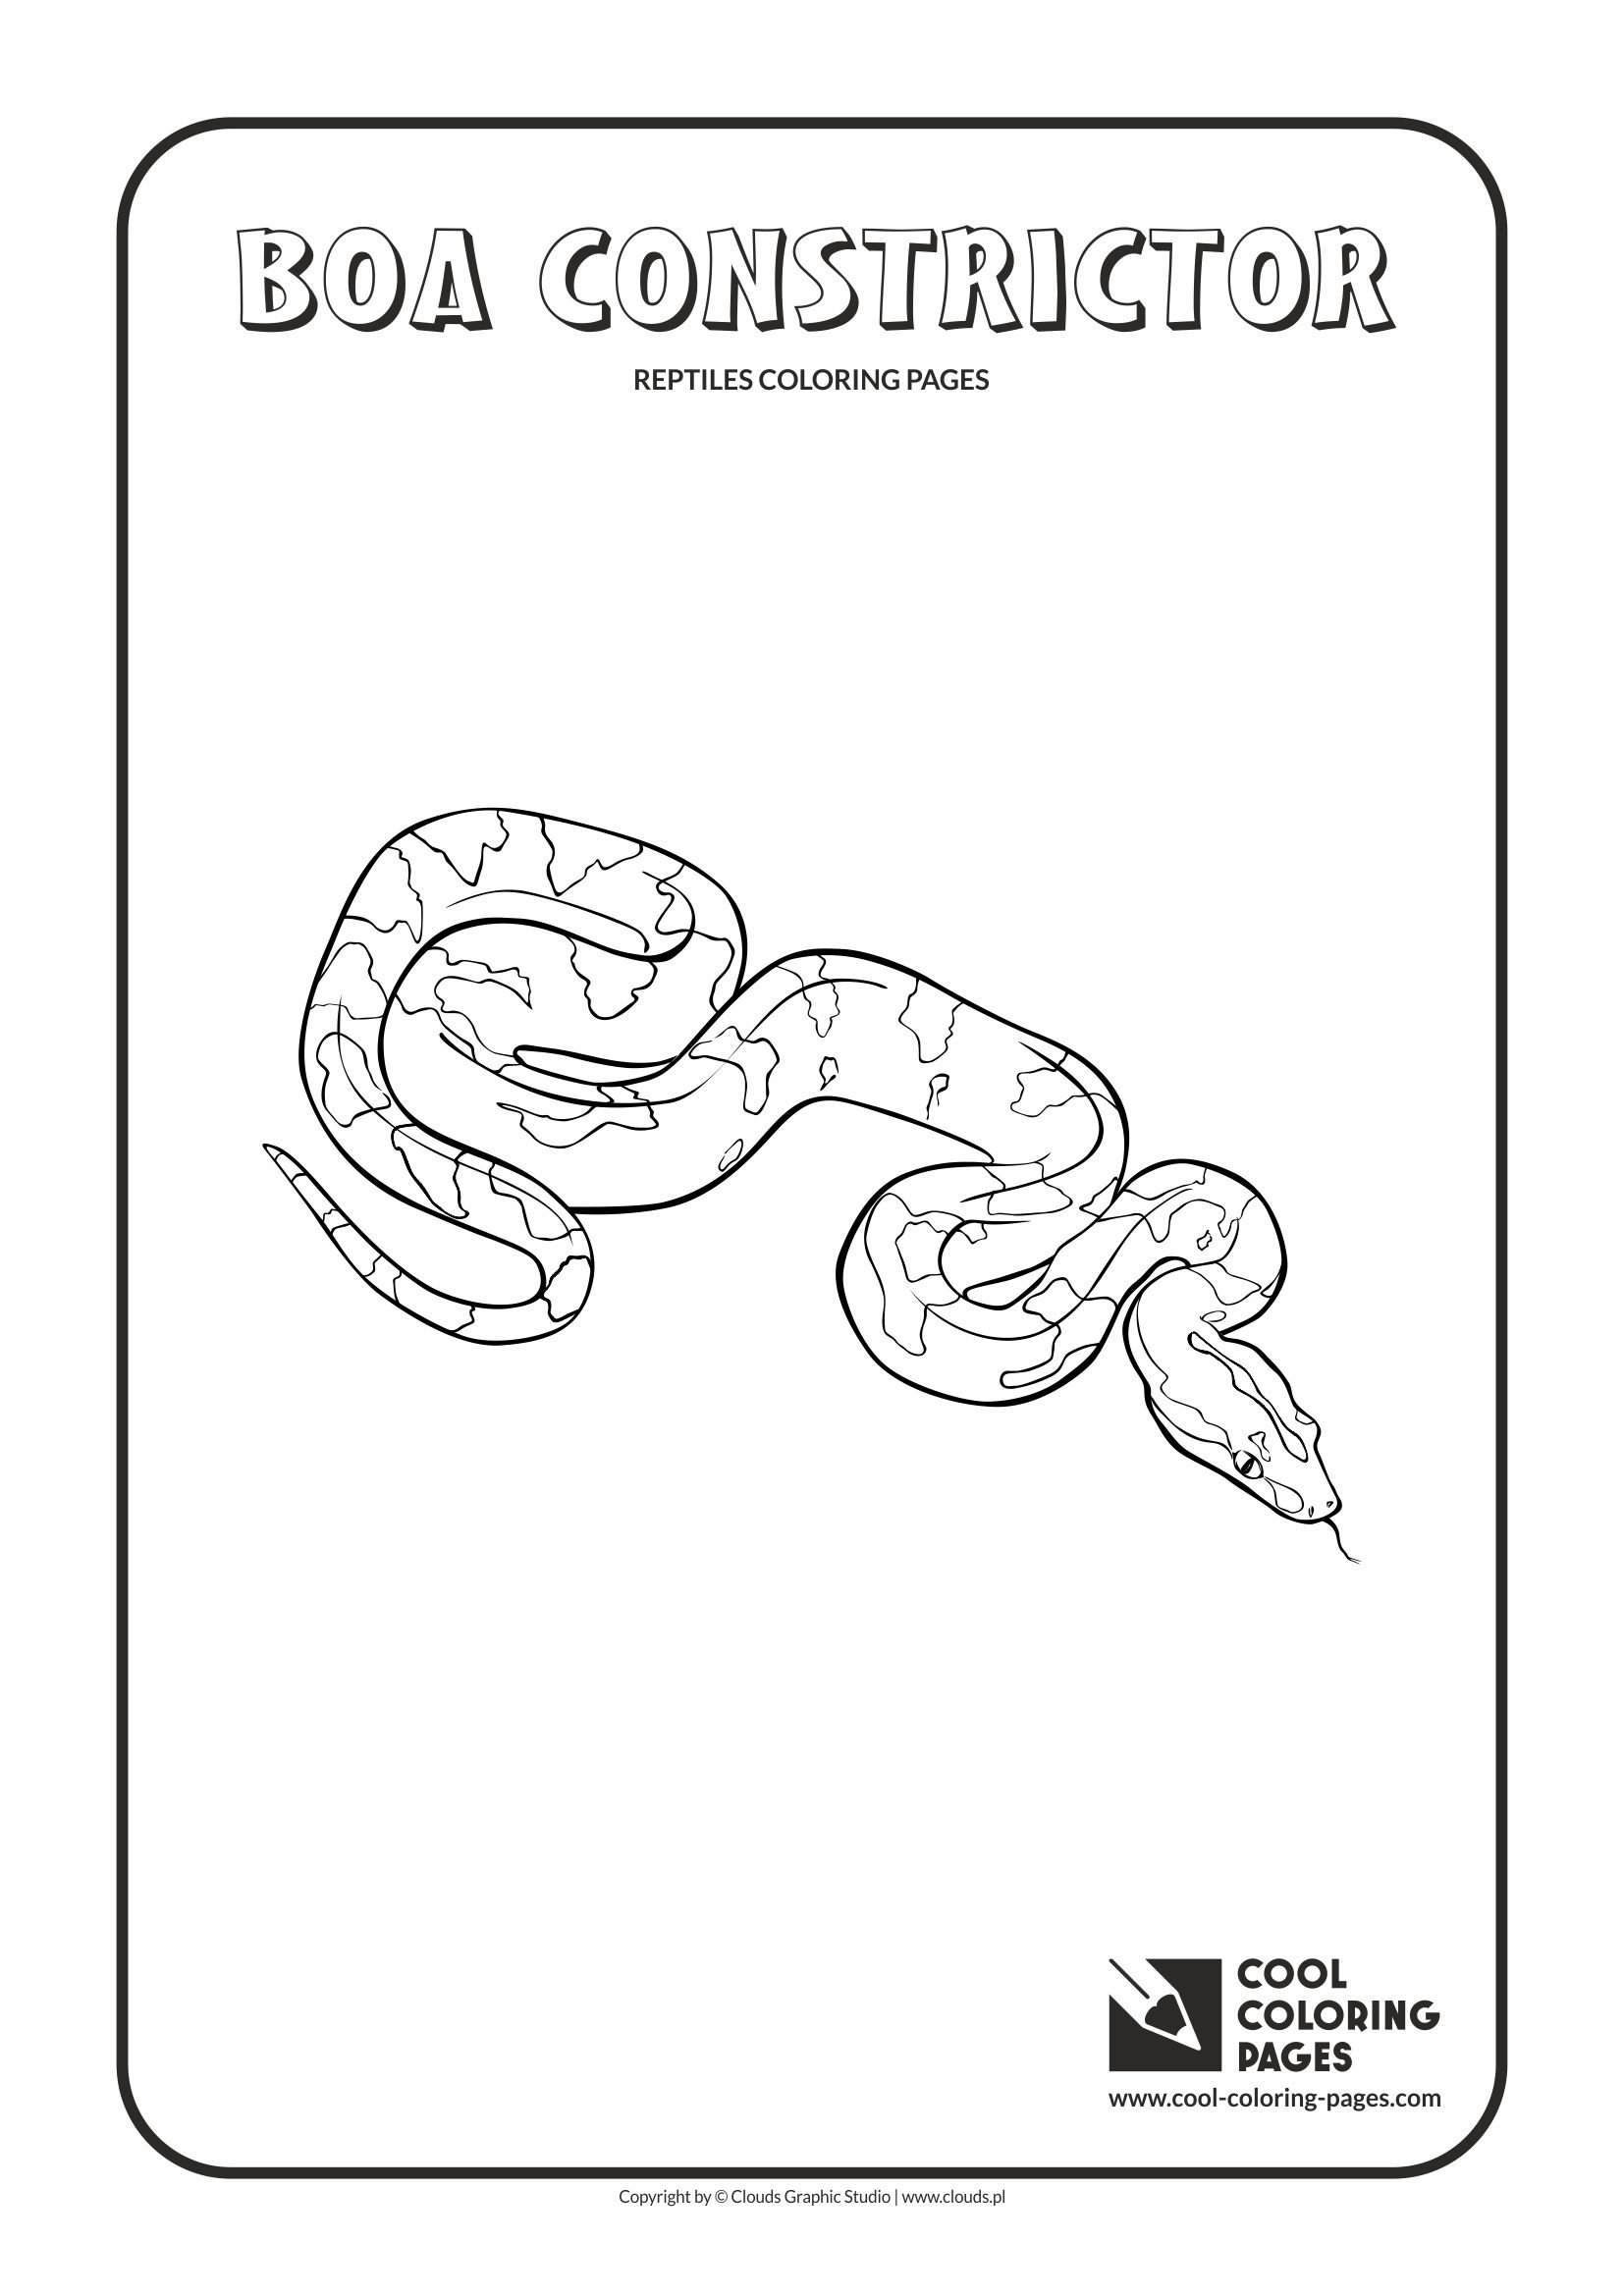 Cool Coloring Pages - Animals / Boa constrictor / Coloring page with boa constrictor